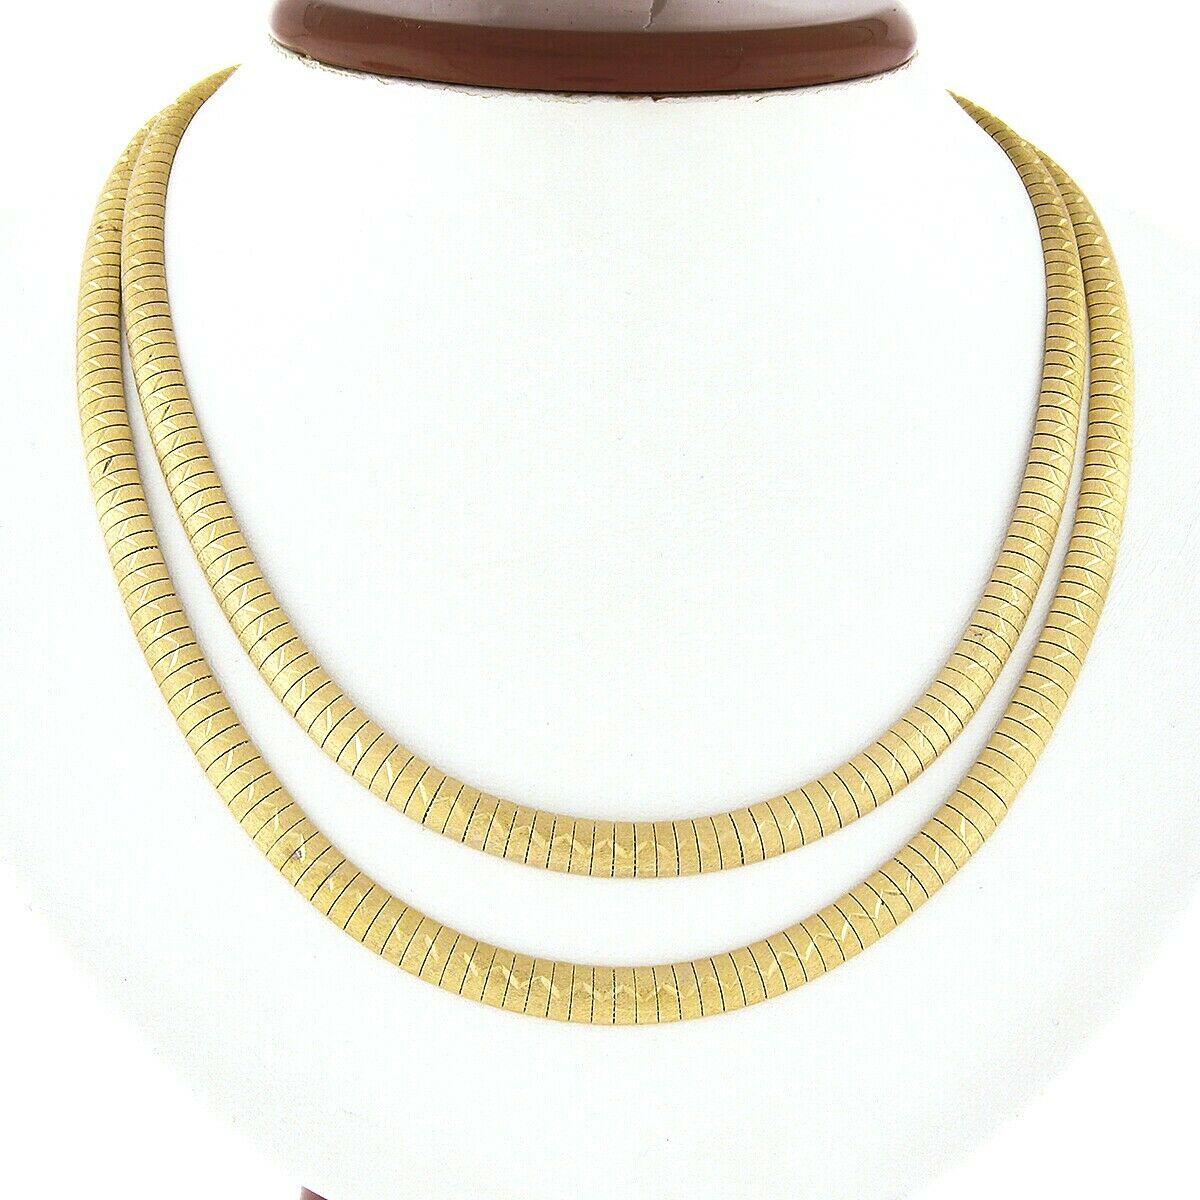 This beautiful necklace and bracelet set was crafted from solid 18k yellow gold and feature multiple straps of very well made fancy omega link design throughout. The bracelet consists of 5 rows, all of which have a matte finish adorned with an